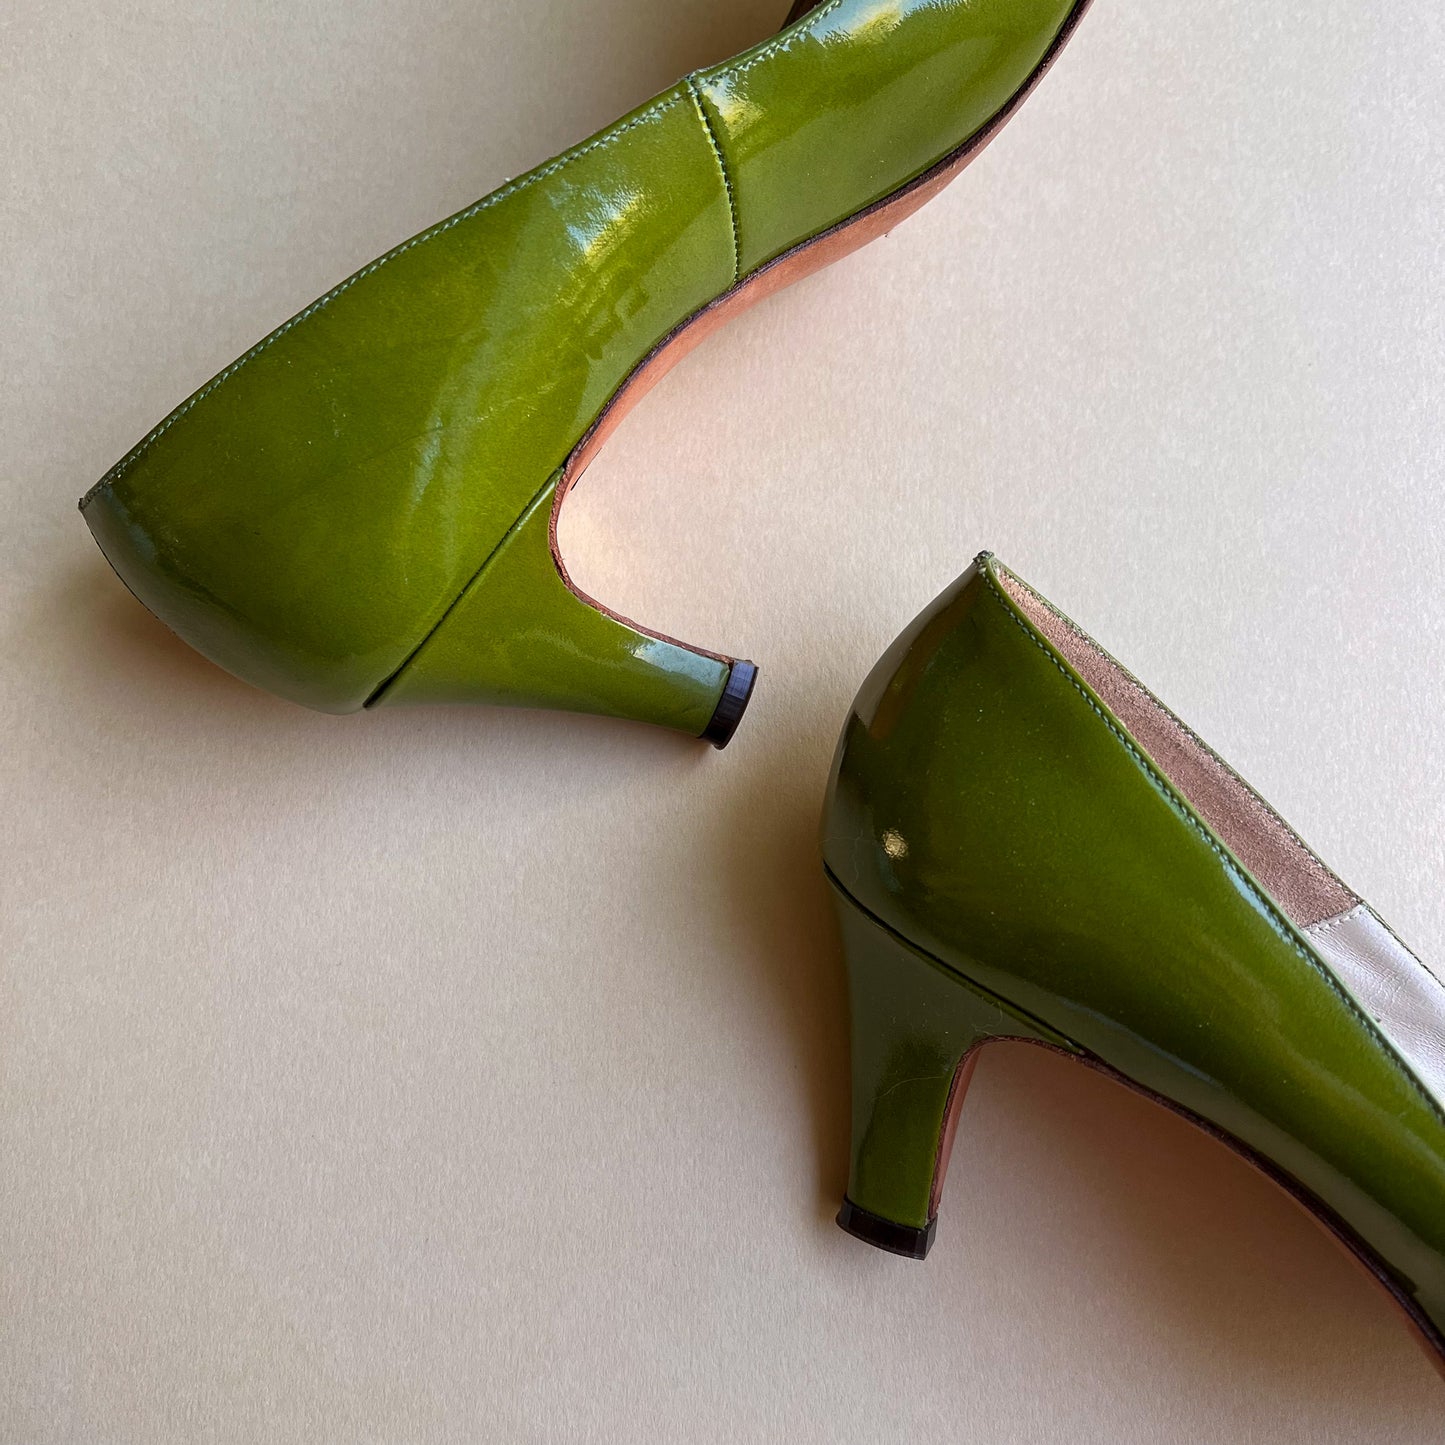 1960s Geppetto Olive Patent Leather Kitten Heels (9)